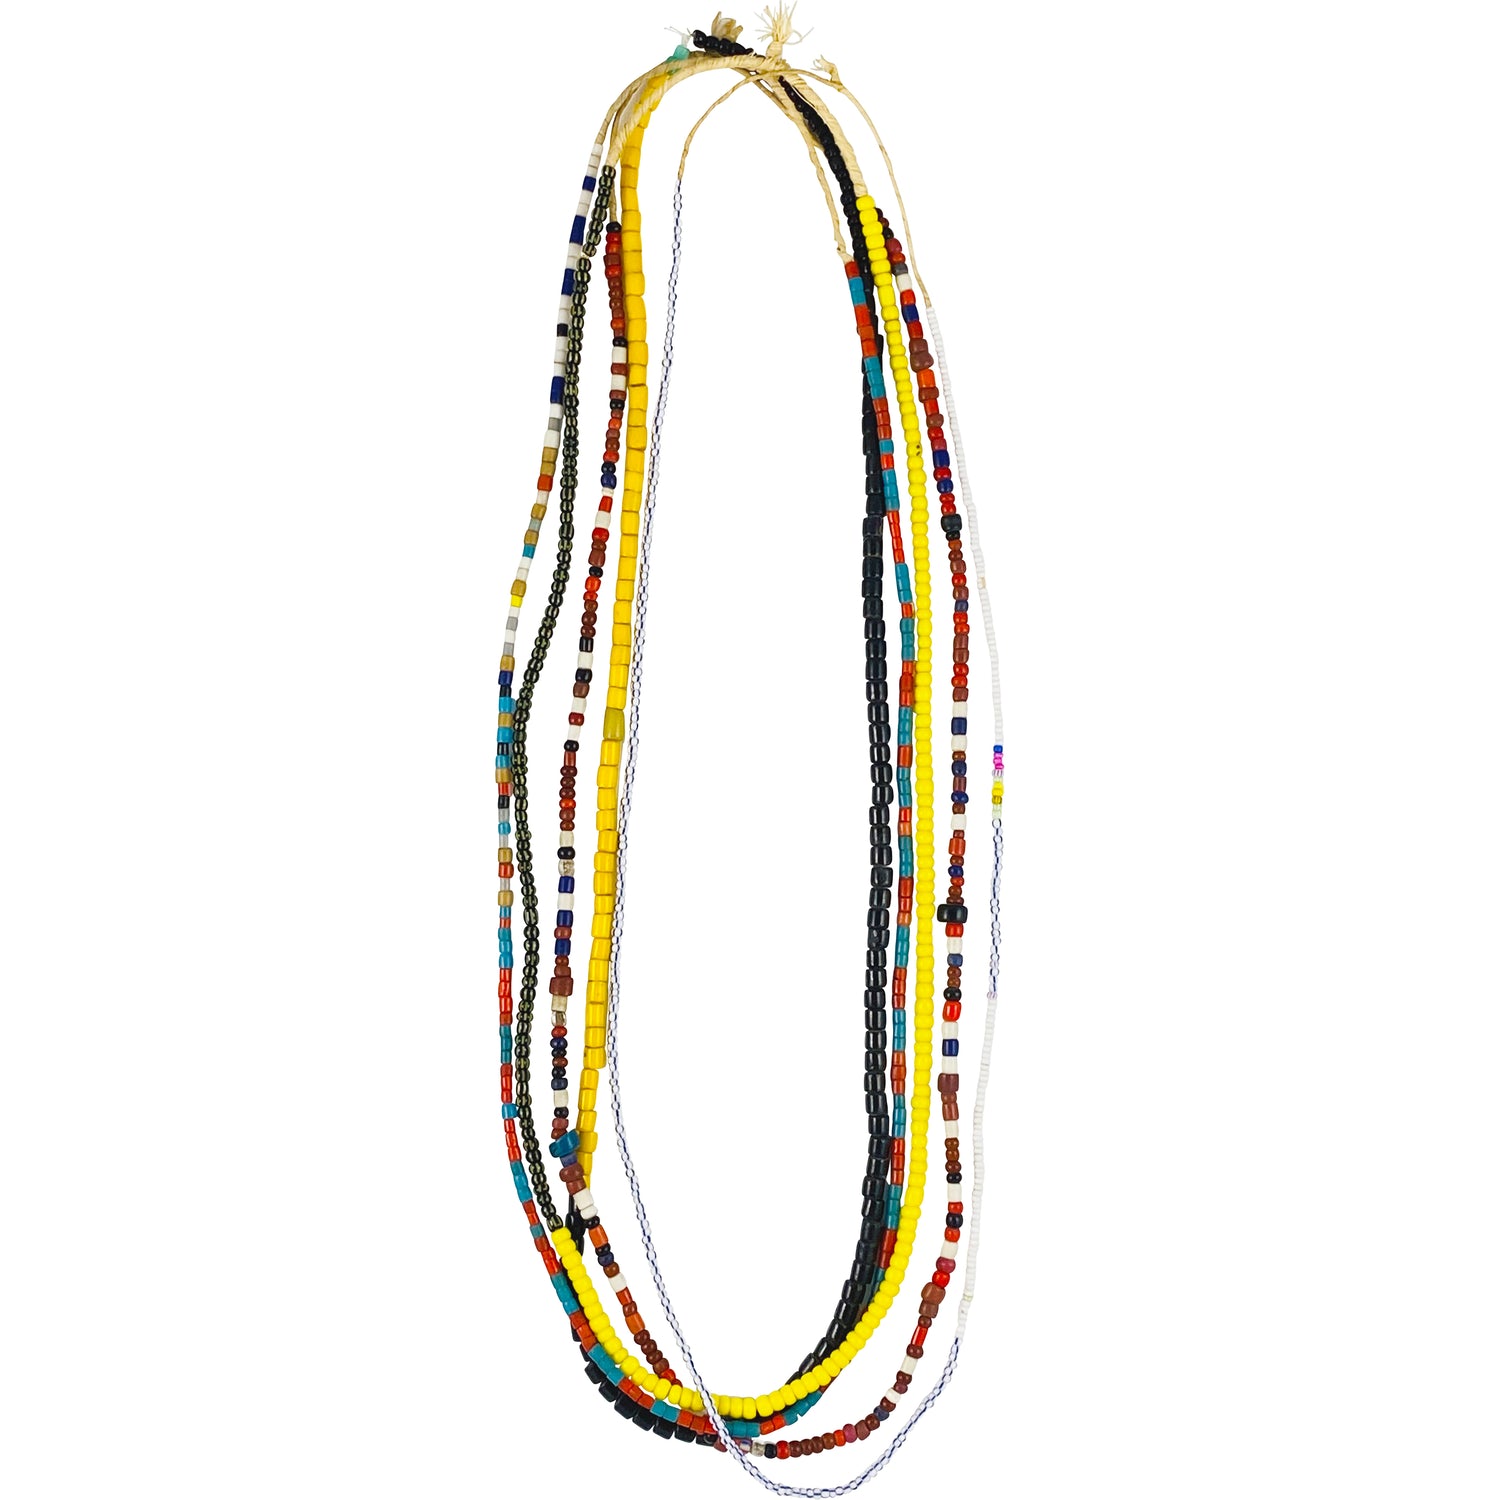 CURATED AFRICAN BEADED STRINGS x 5